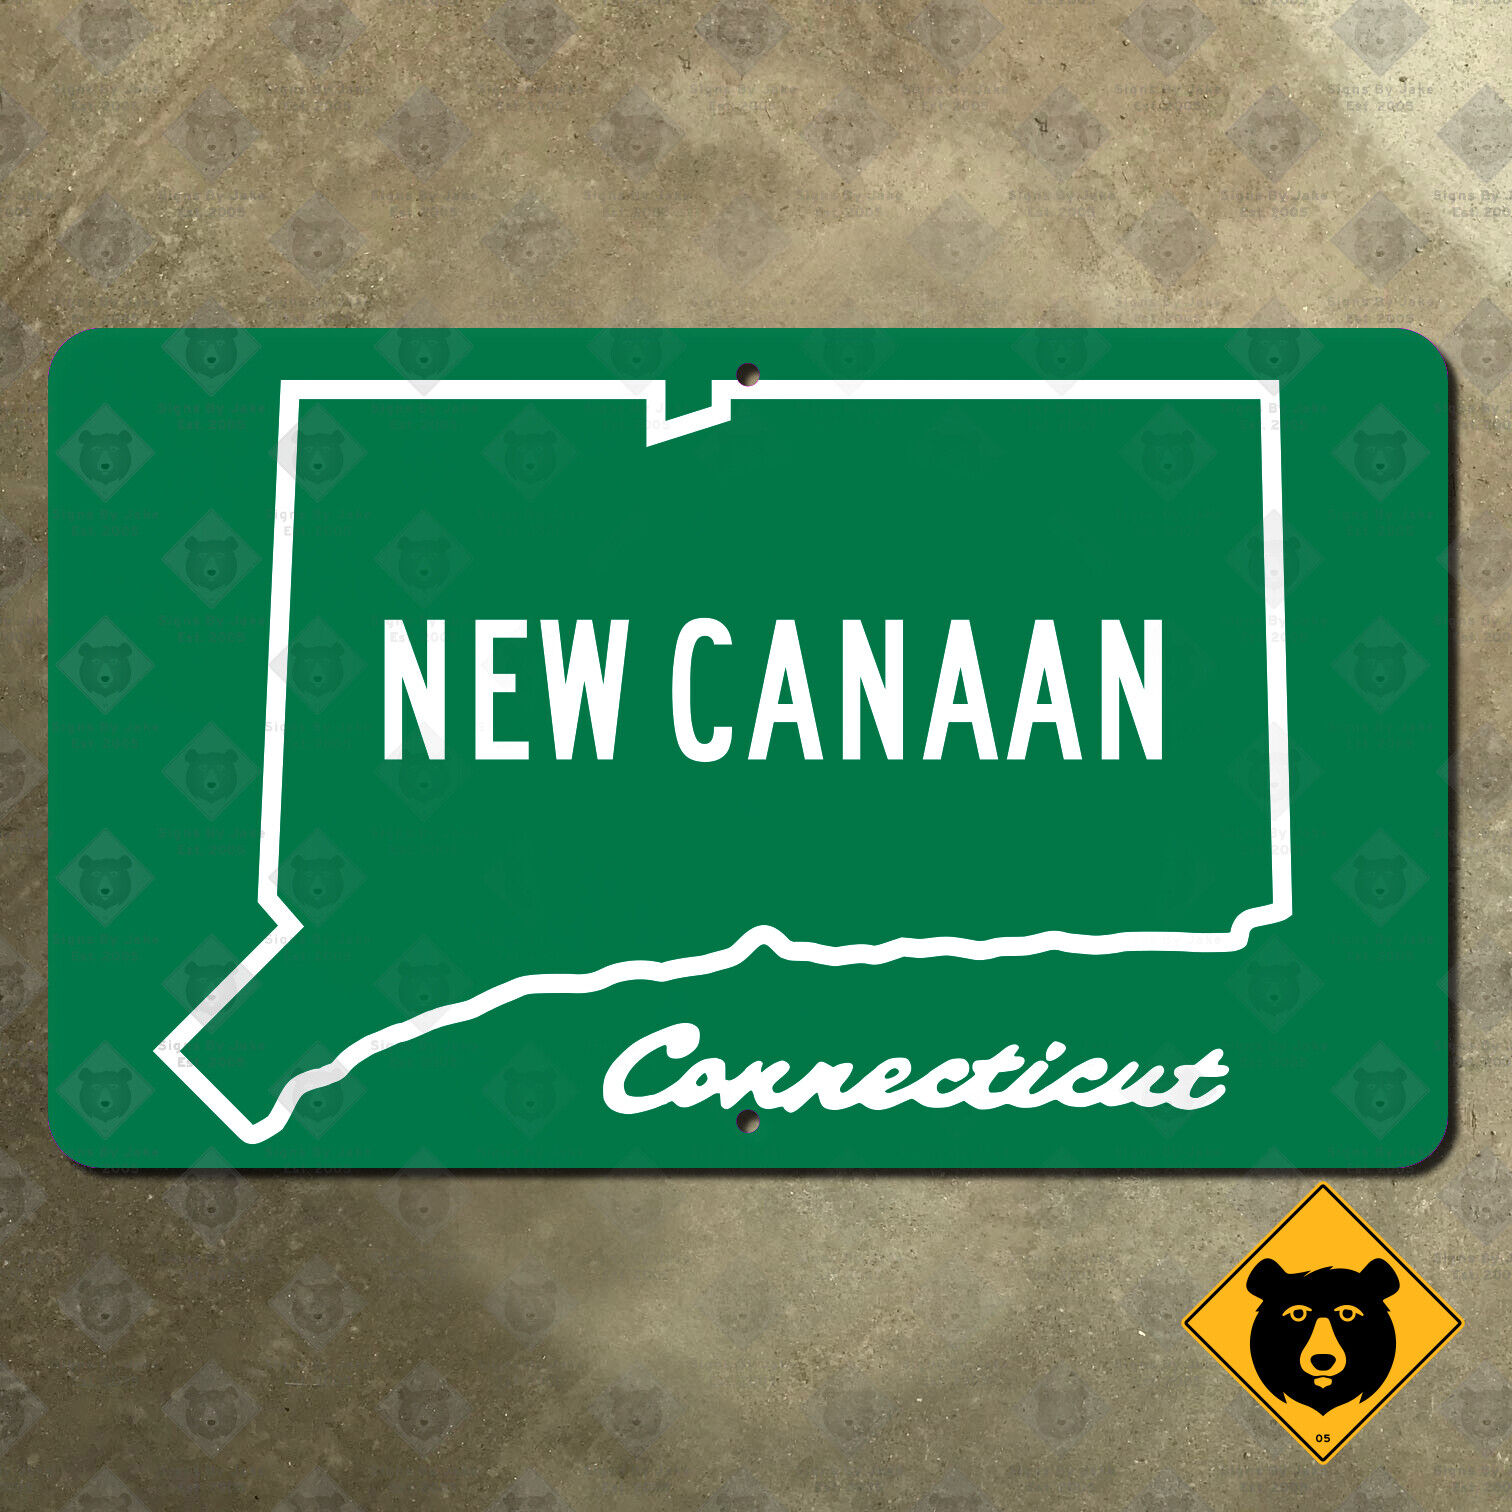 Connecticut New Canaan city limits sign highway boundary marker outline 15x9